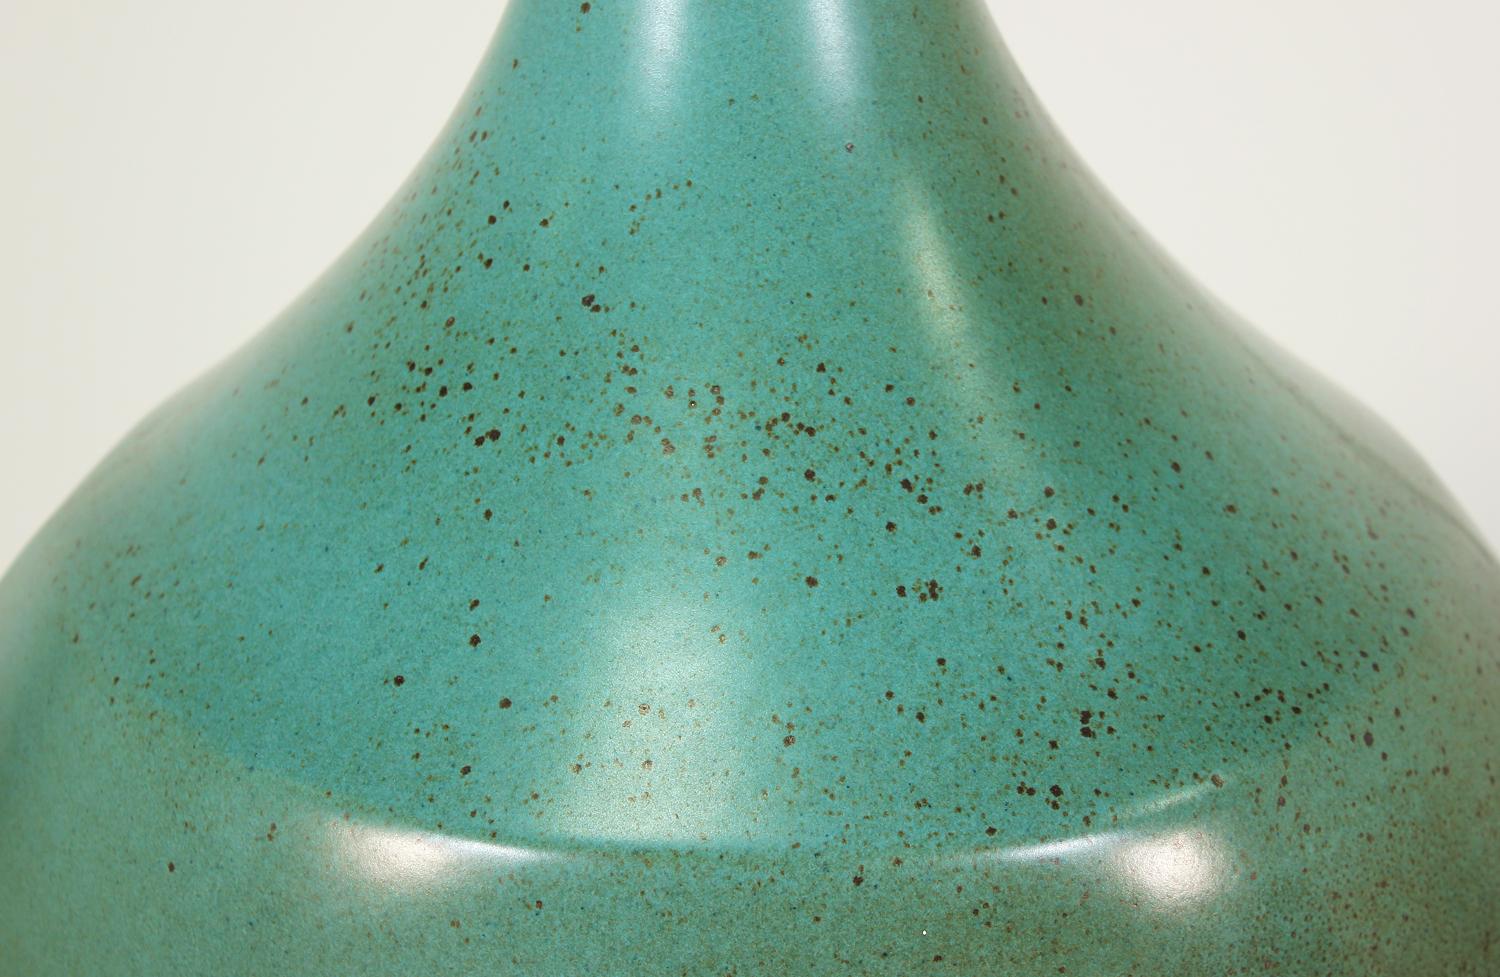 David Cressey Glazed Teal Ceramic Table Lamp for Architectural Pottery 1